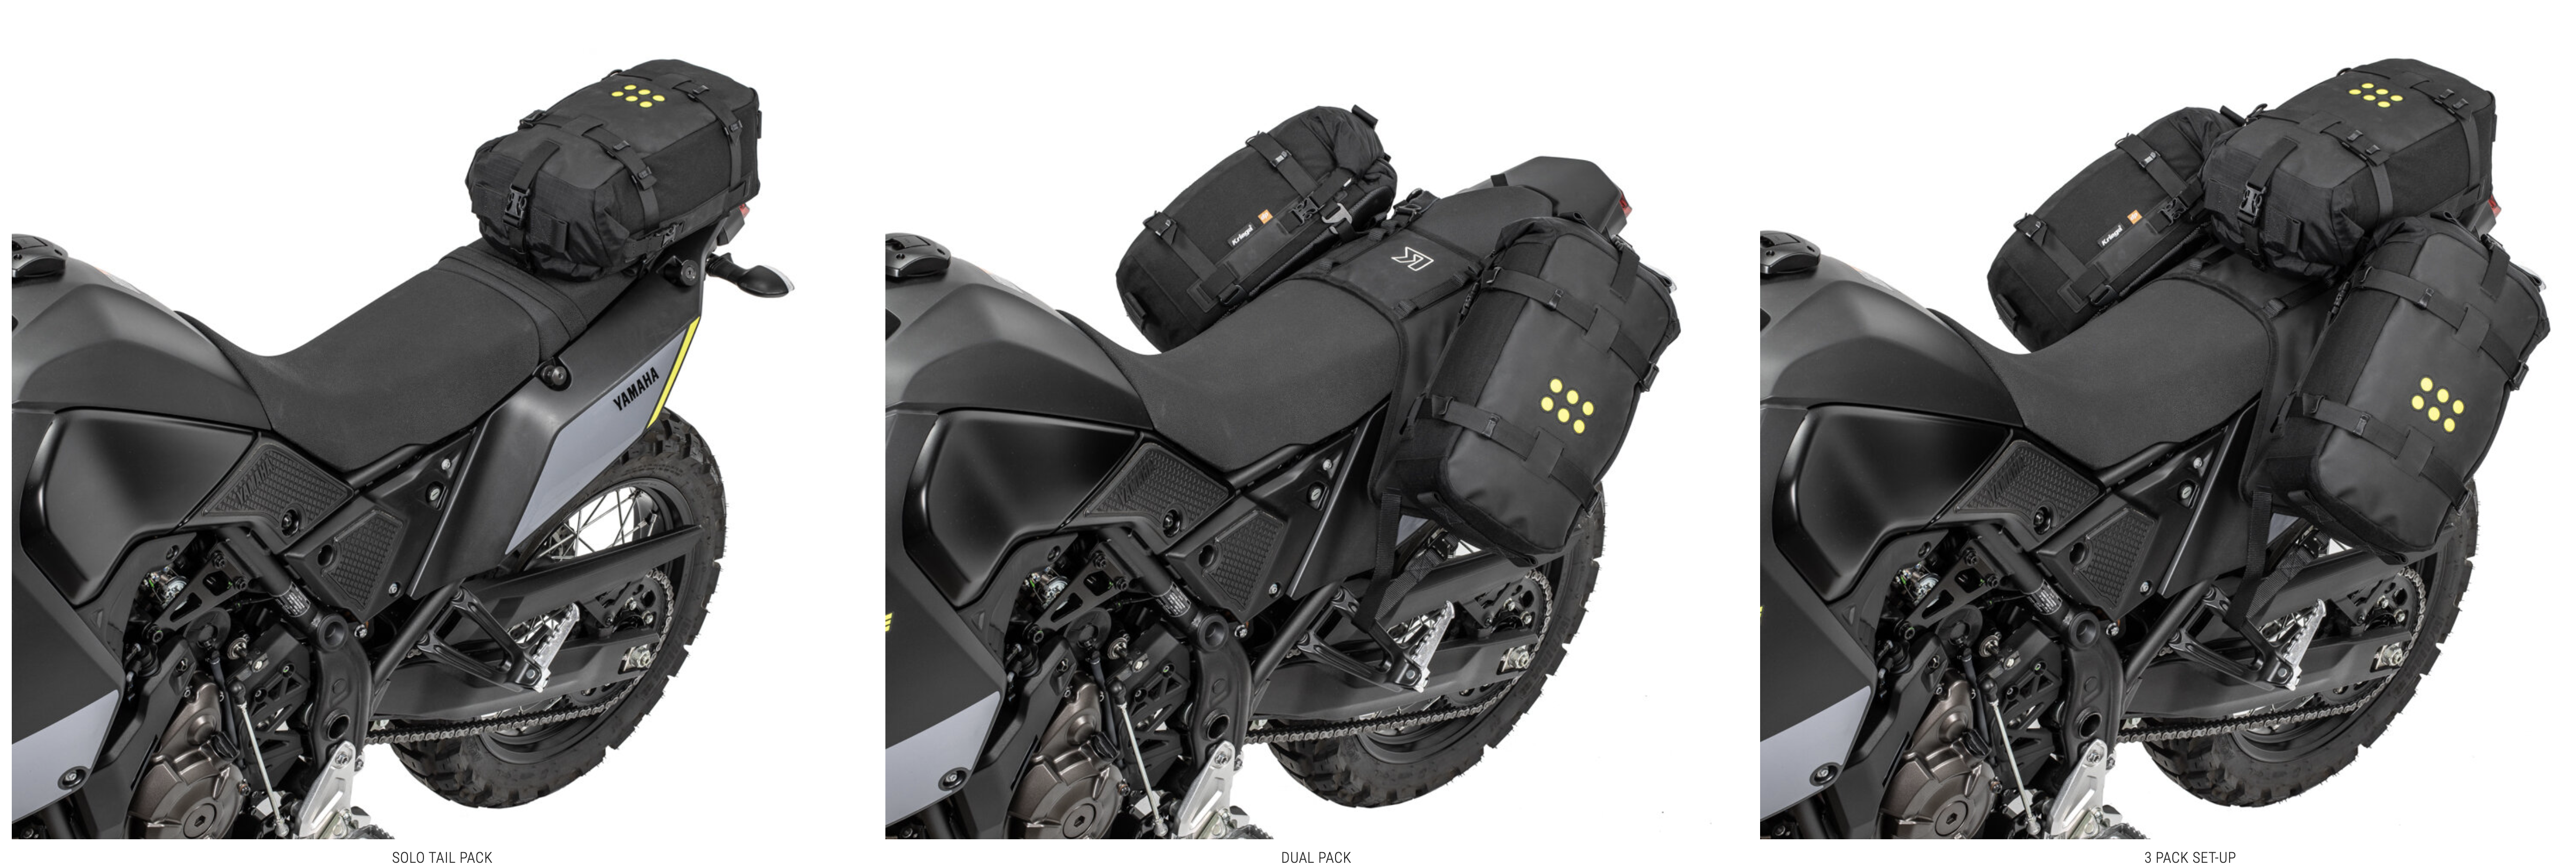 Kriega OS-Base KTM 790 / 890 Adventure Mounting System for OS Bags